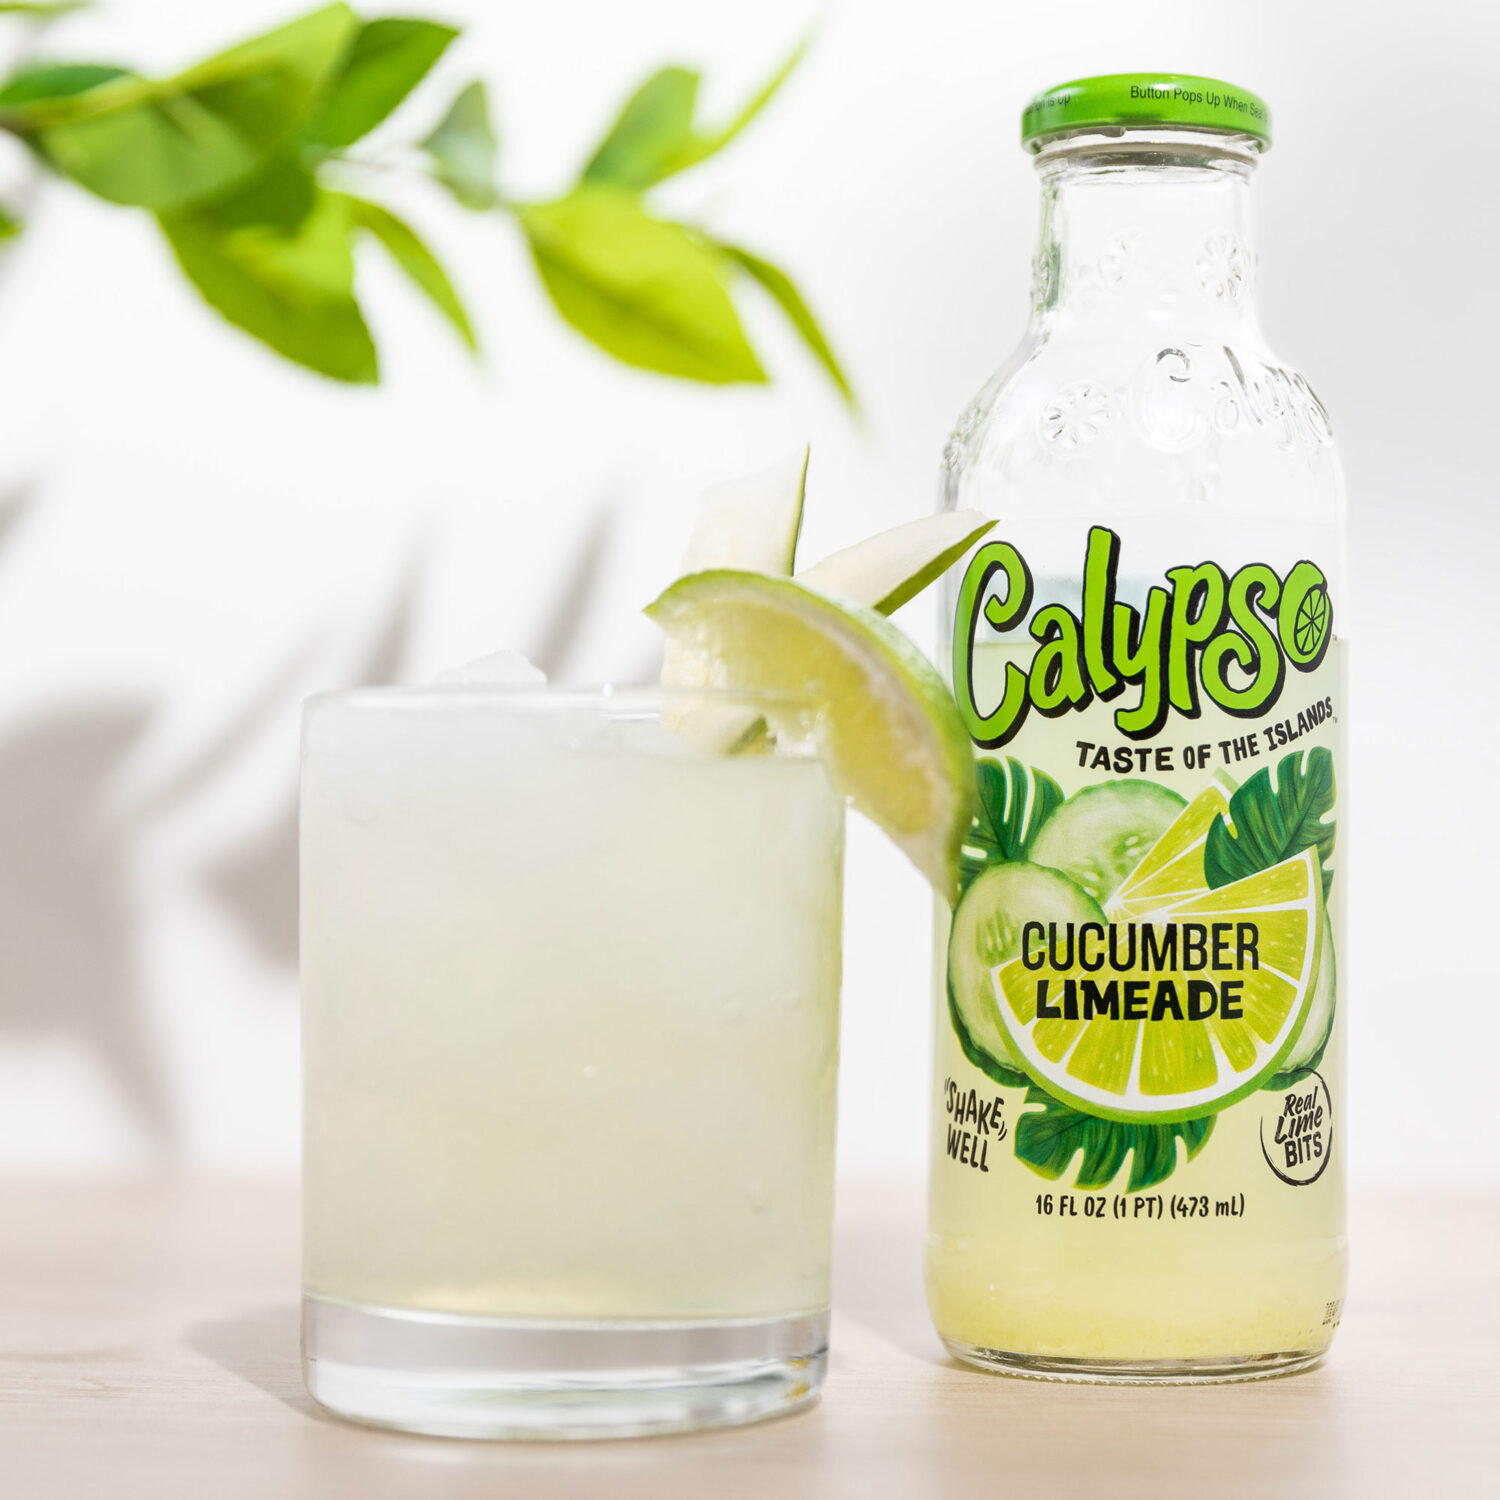 A bottle of Calypso Cucumber Limeade next to a cocktail.